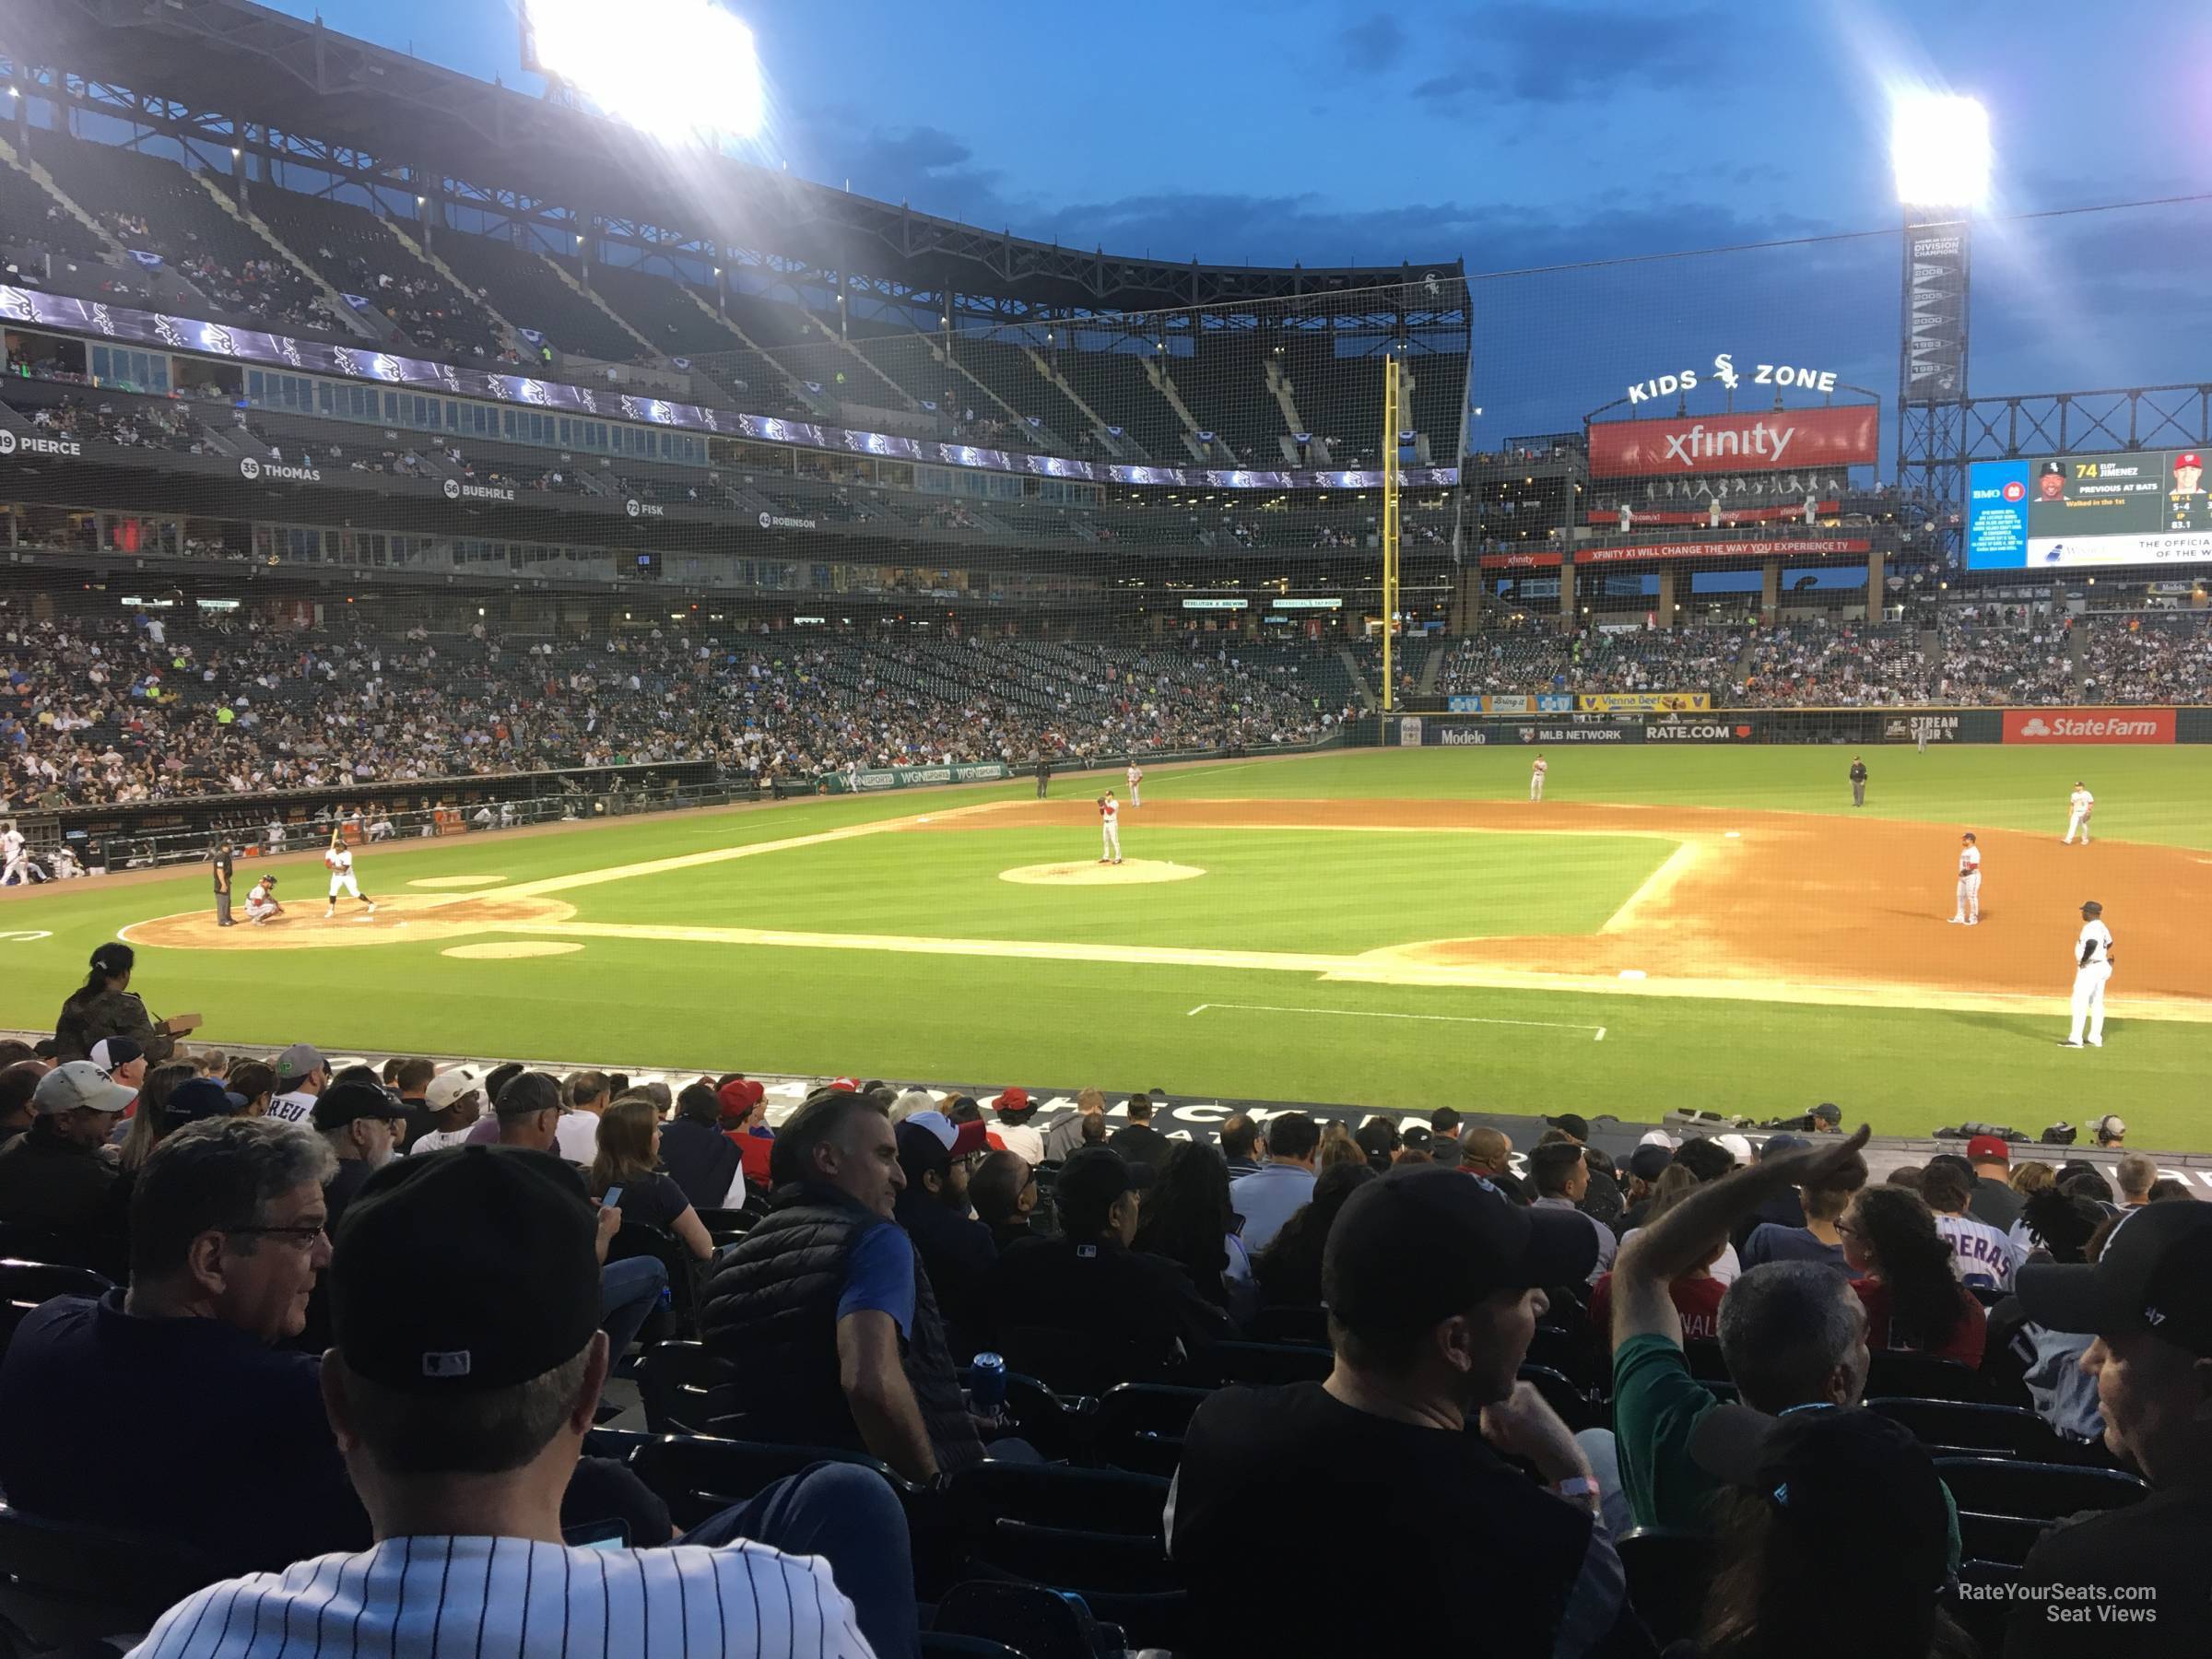 section 123, row 24 seat view  - guaranteed rate field